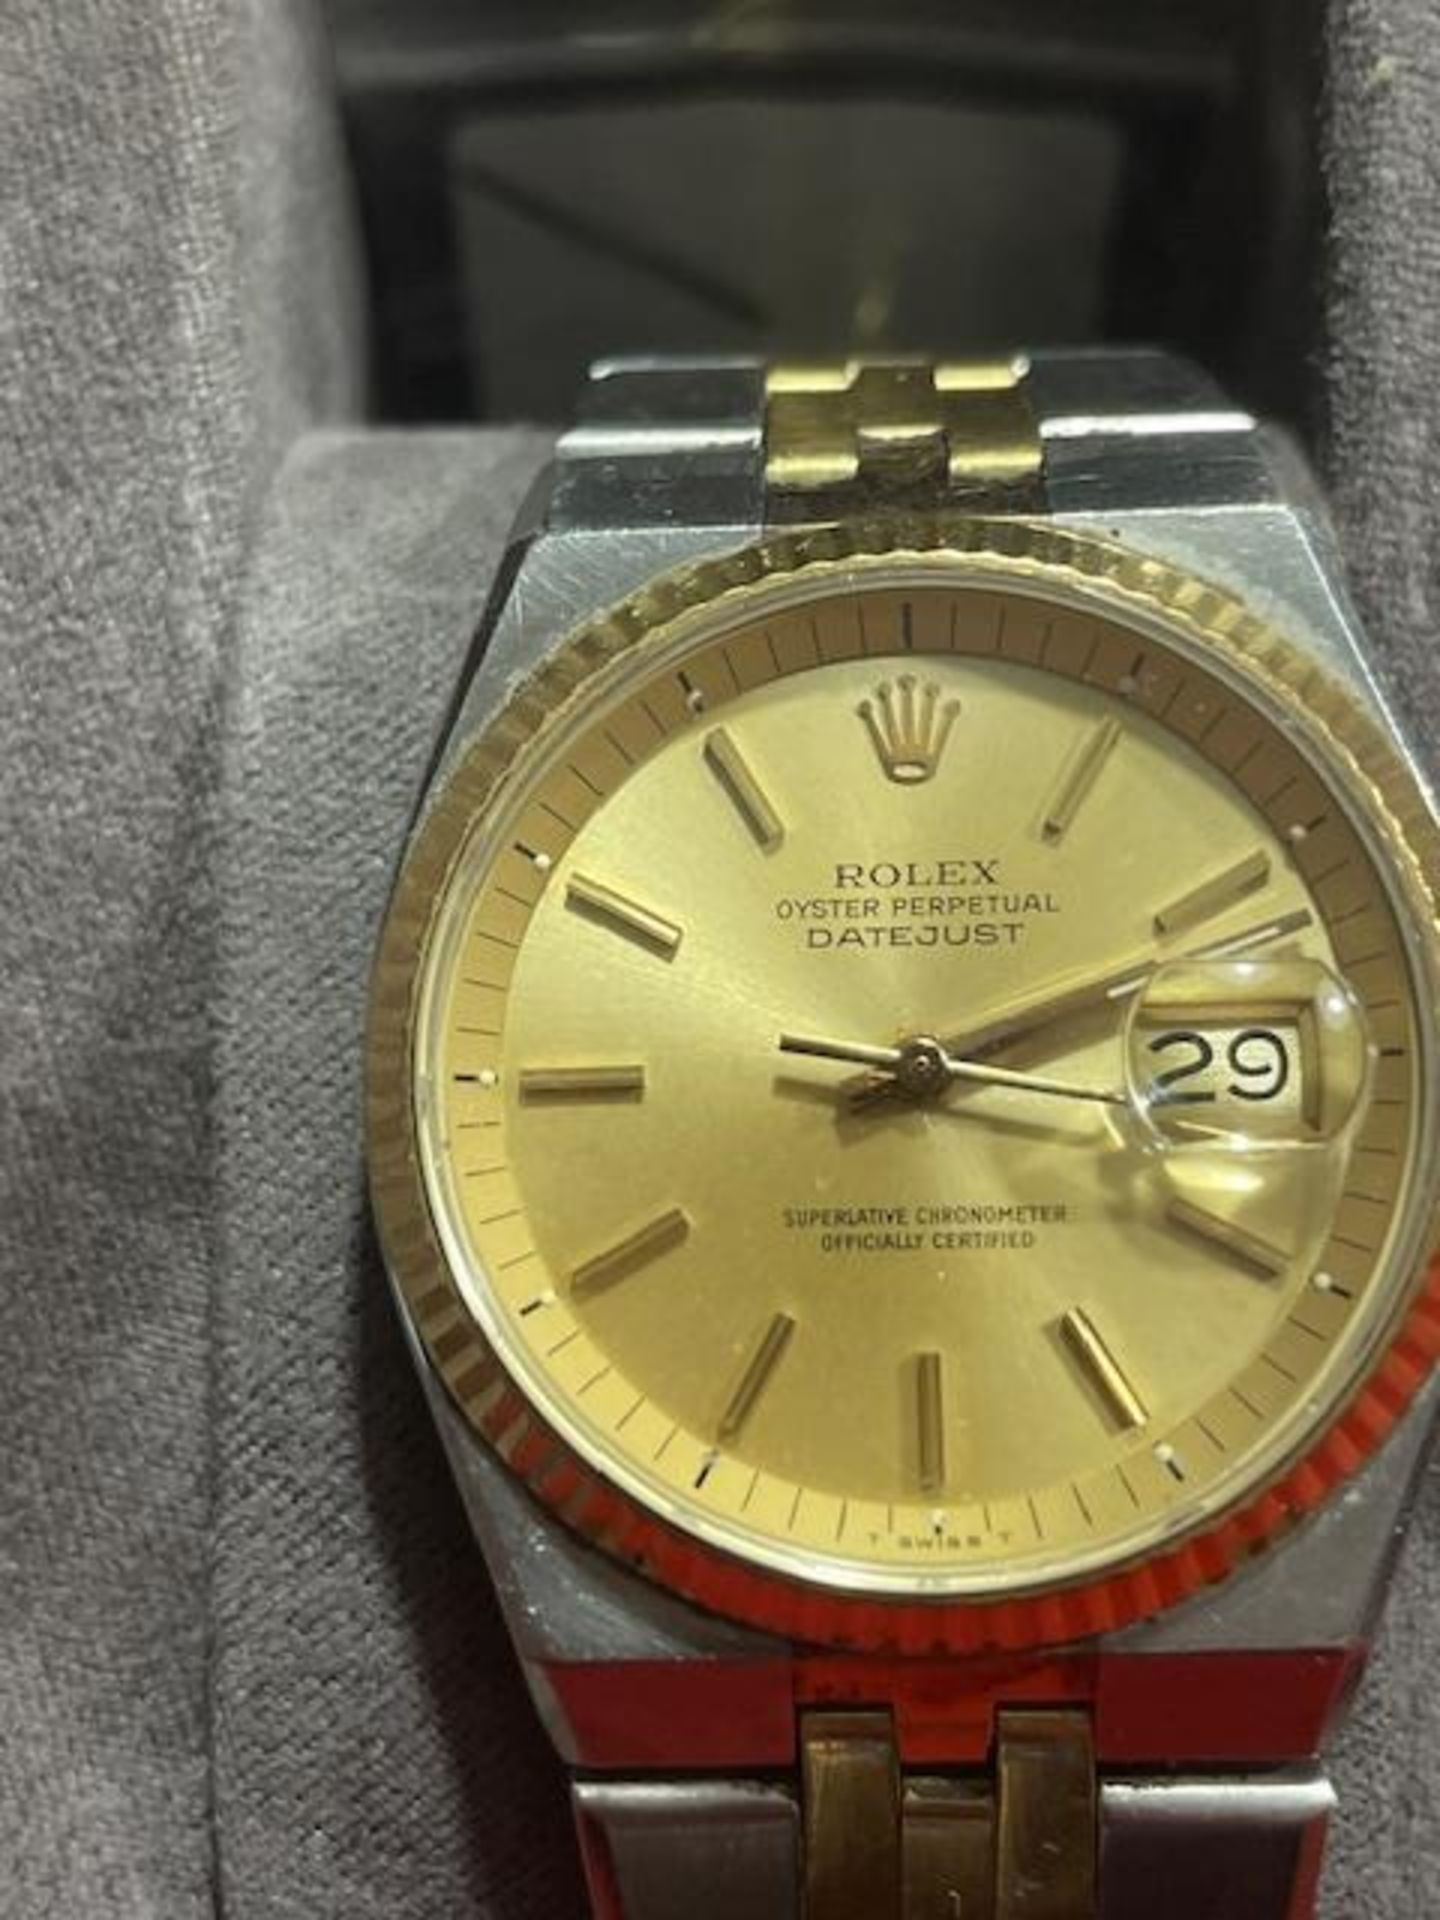 Rolex Oyster Purpetual DATEJUST Mens Watch - Image 9 of 20